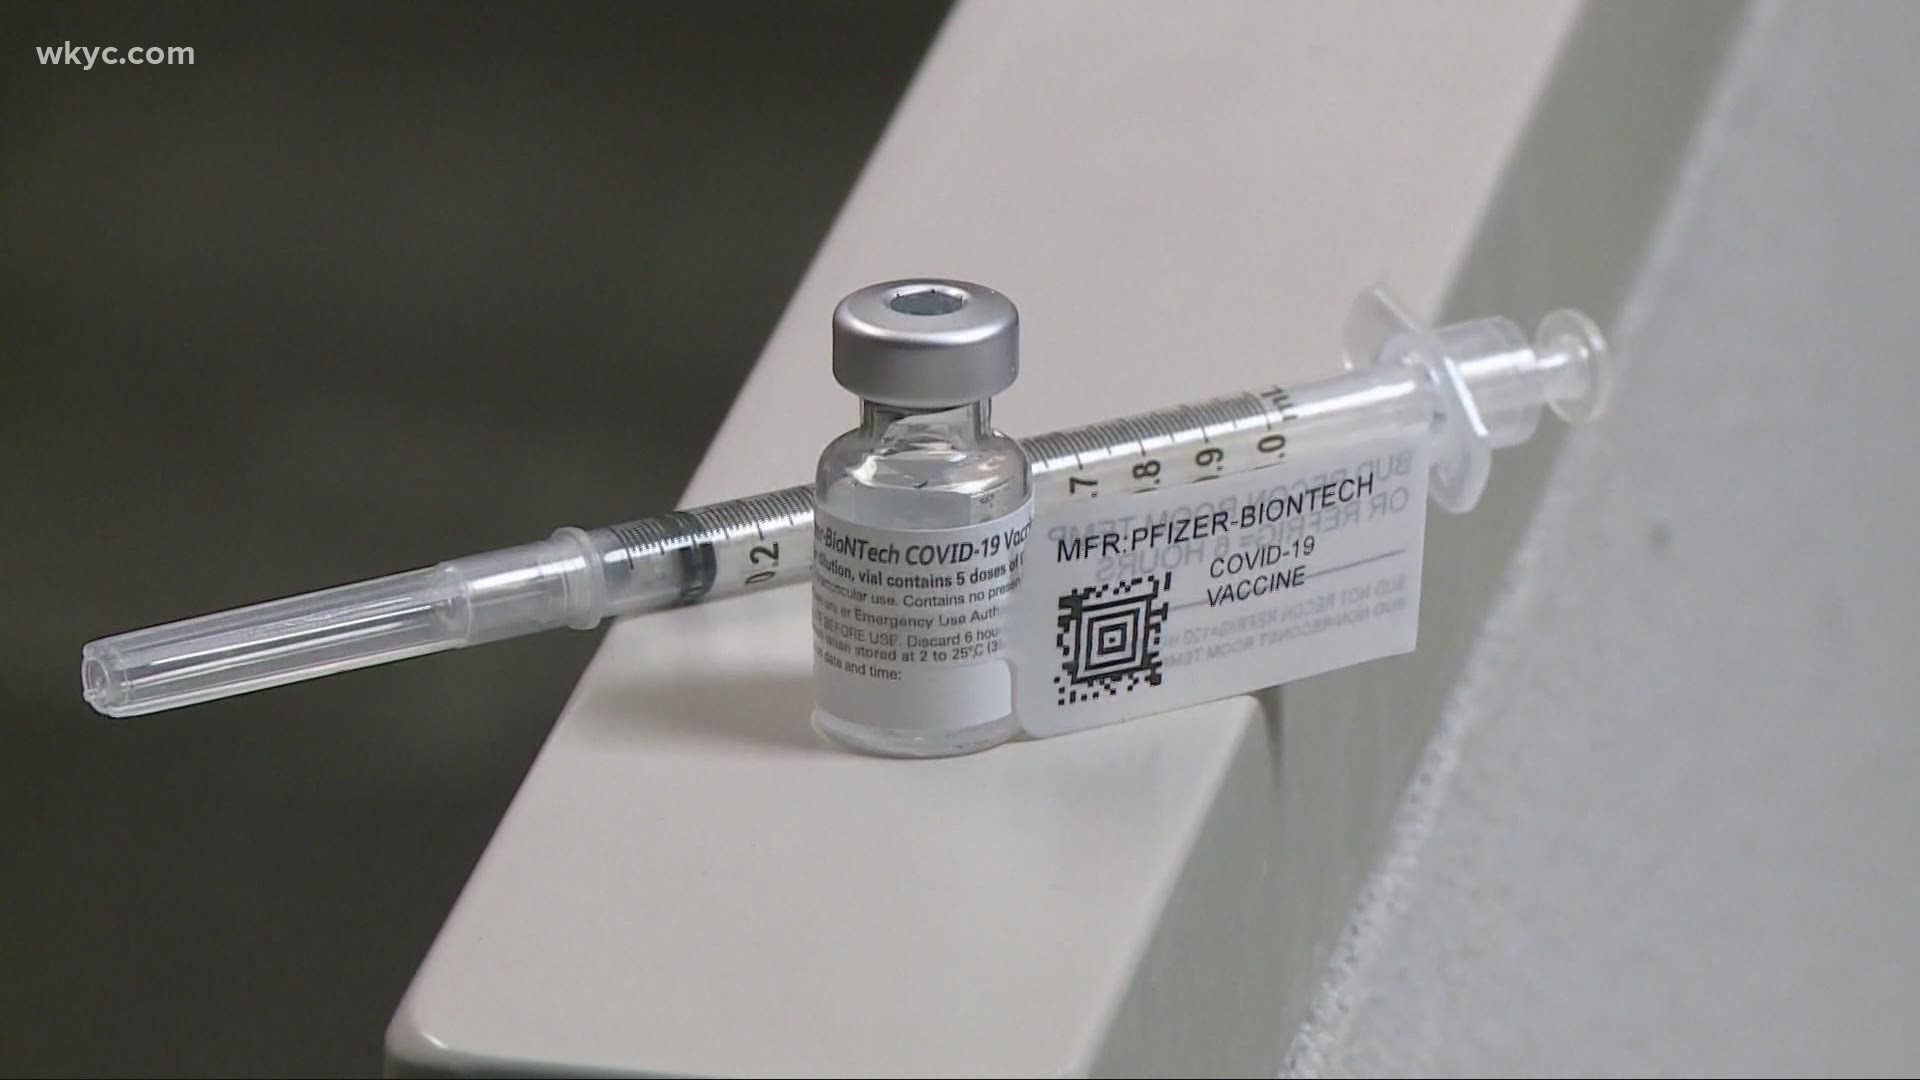 A new study is exploring the vaccine's side effects. Andrew Horansky reports.